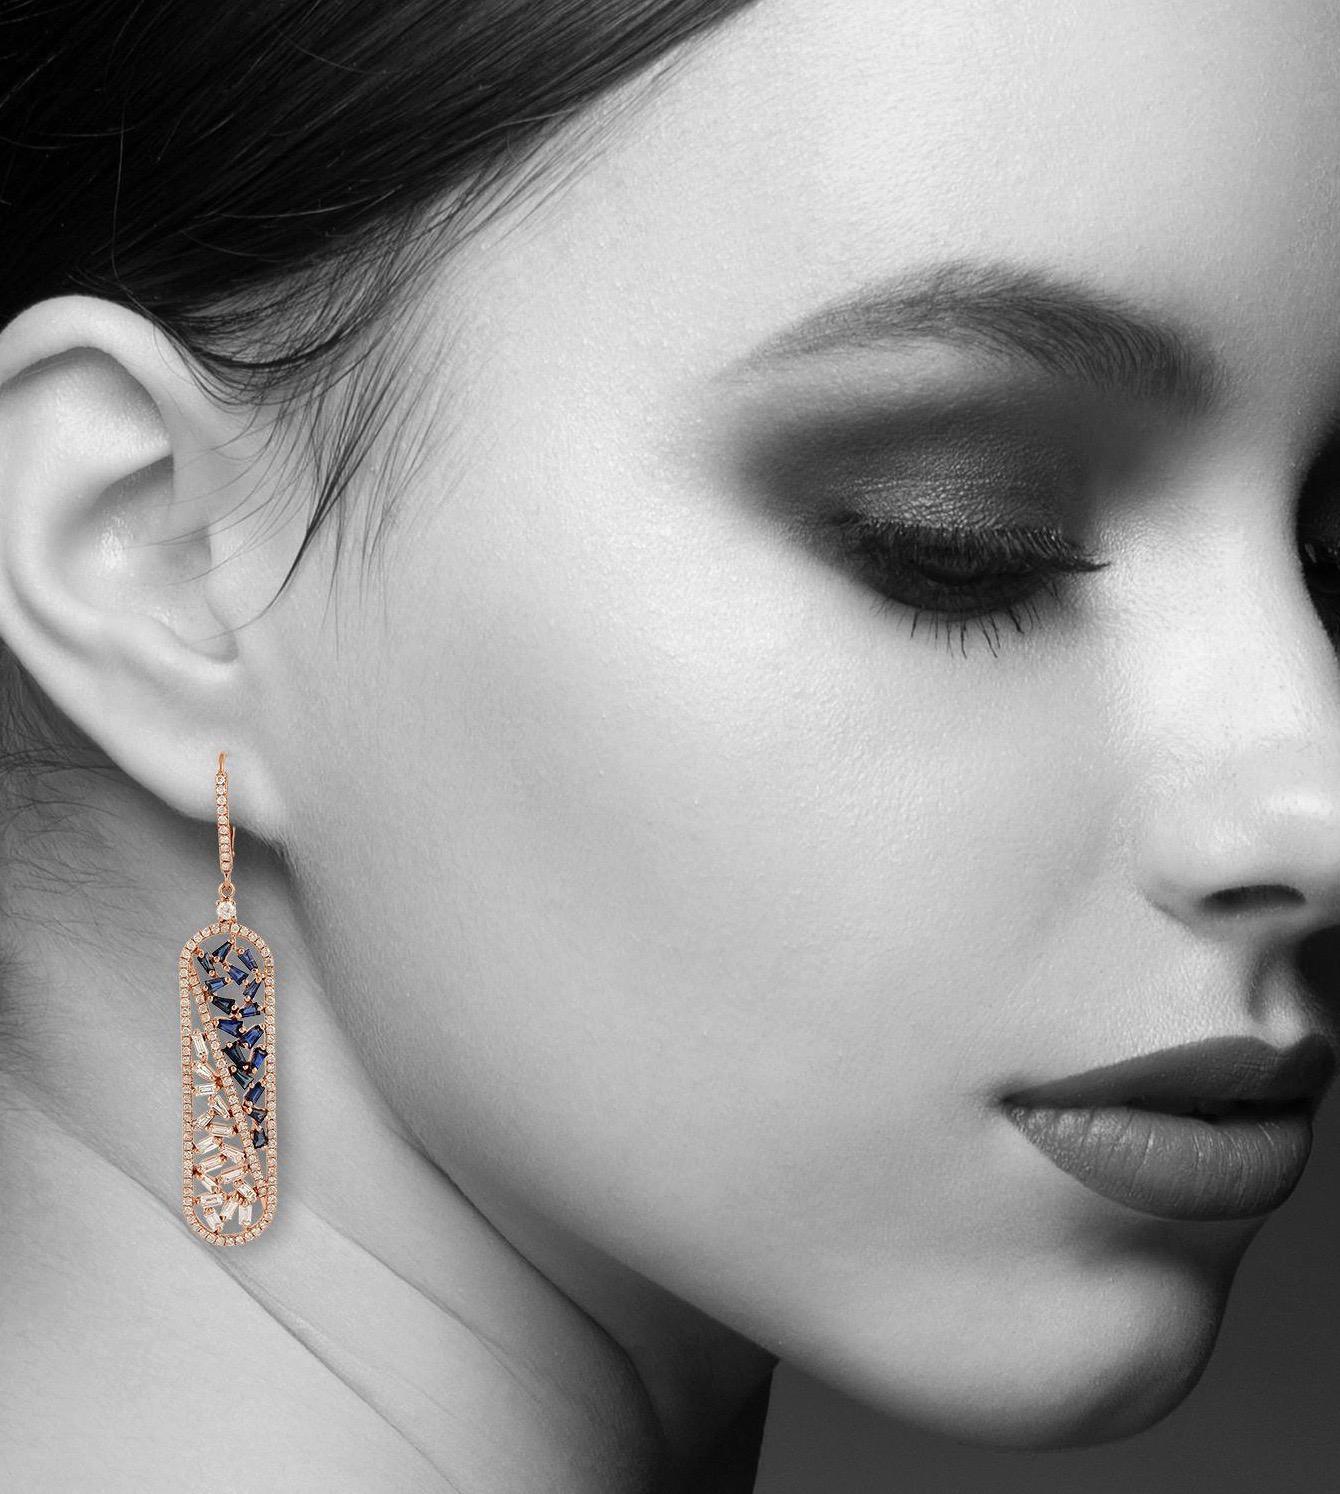 Handcrafted from 18-karat gold, these stunning drop earrings are set with 2.46 carats baguette diamonds and 1.63 carats blue sapphire. 

FOLLOW  MEGHNA JEWELS storefront to view the latest collection & exclusive pieces.  Meghna Jewels is proudly